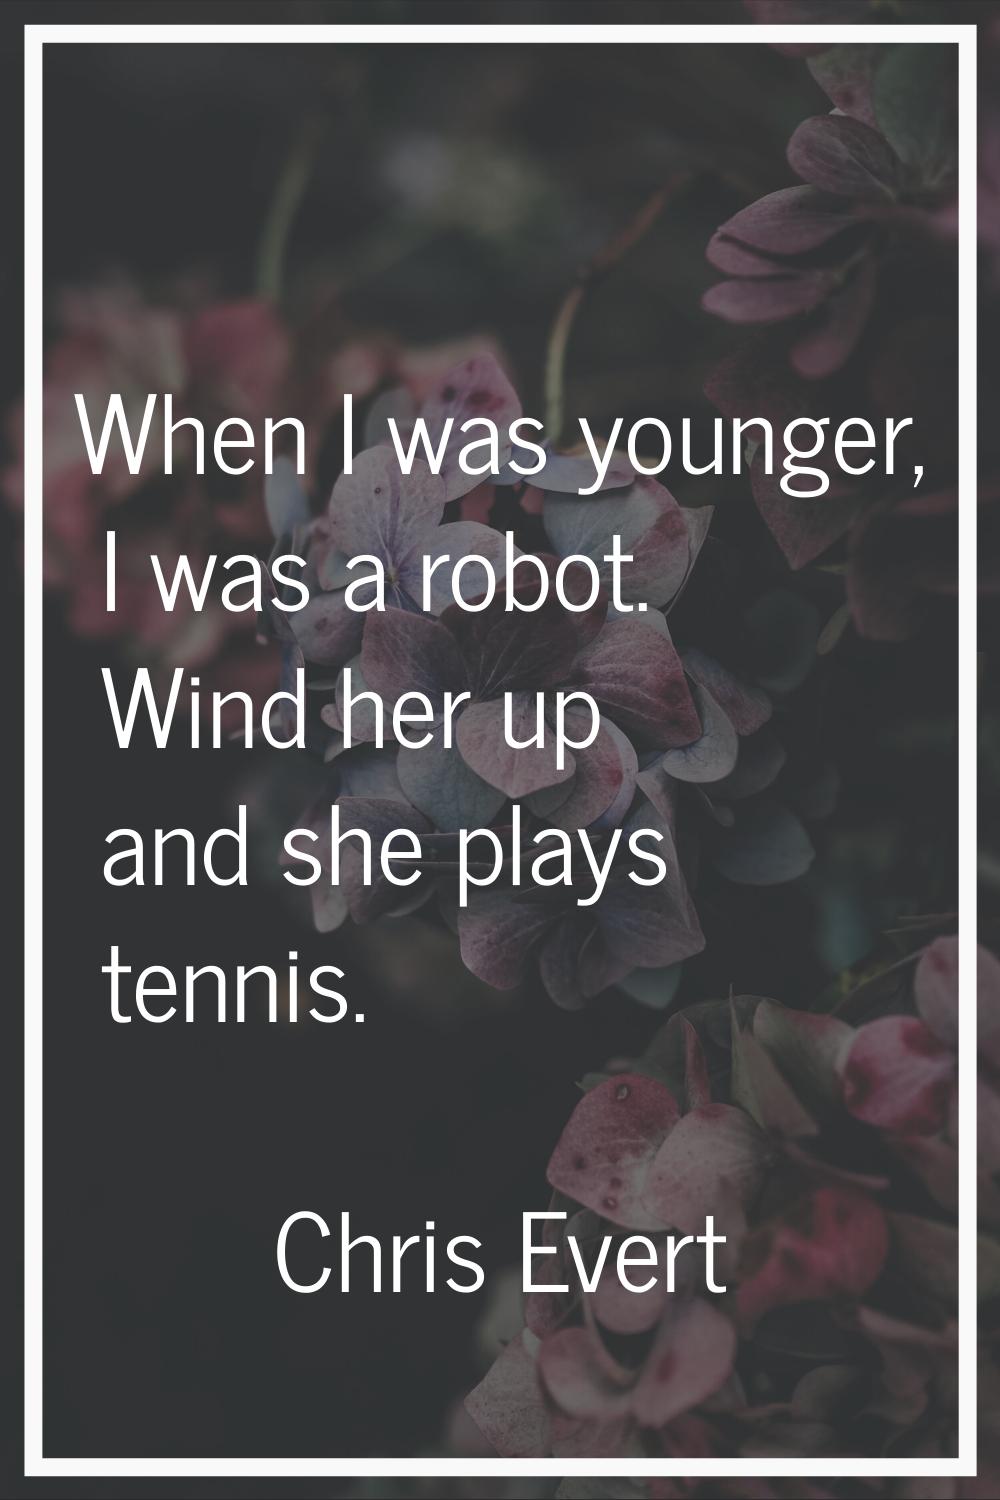 When I was younger, I was a robot. Wind her up and she plays tennis.